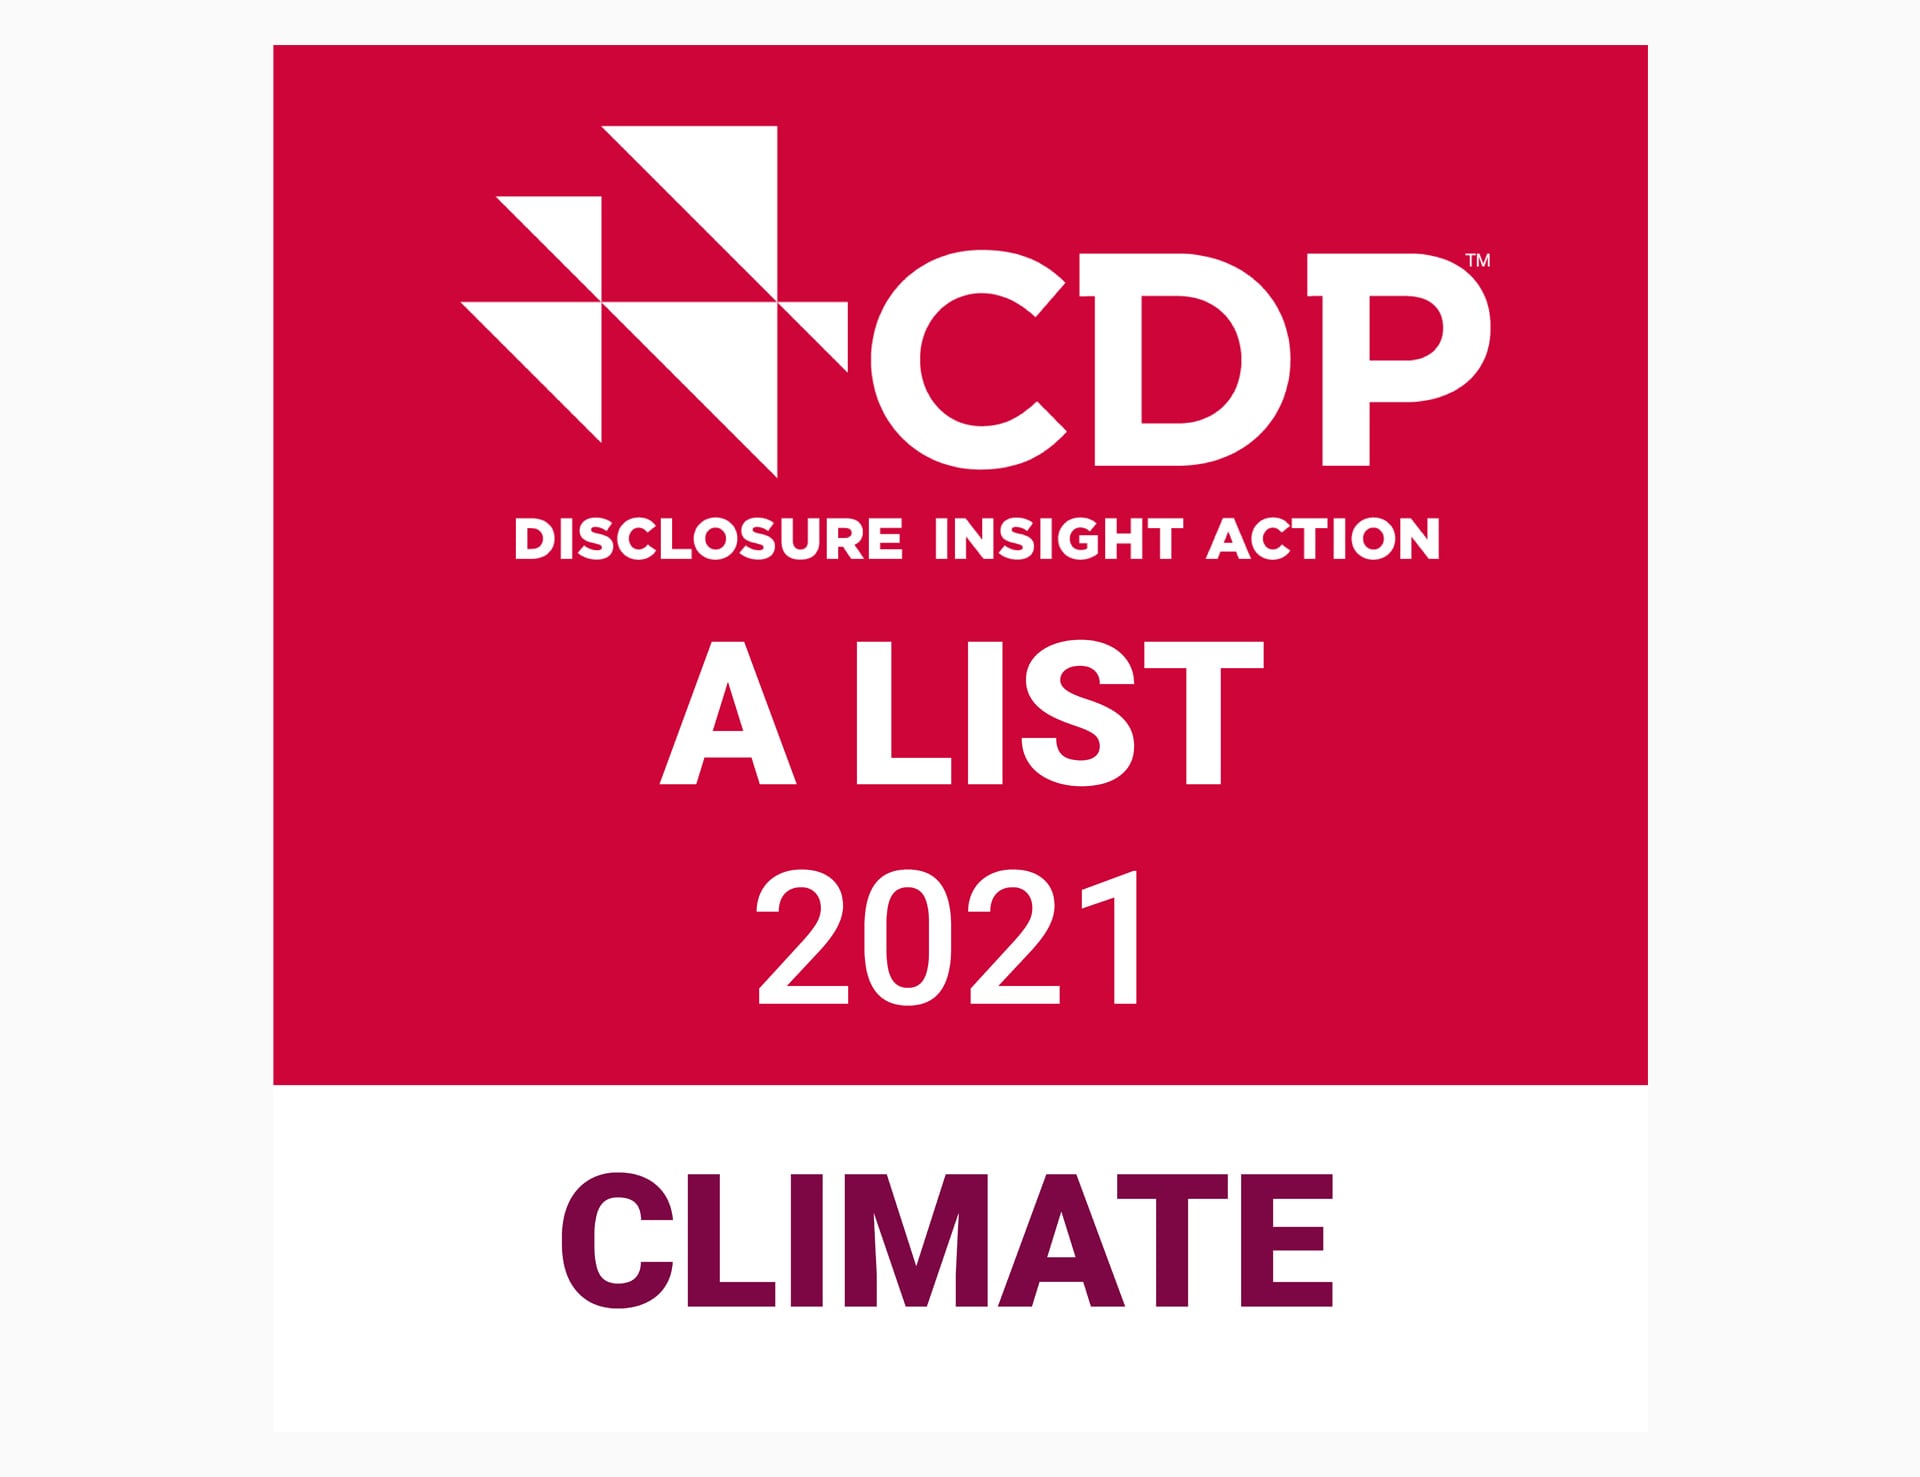 A logo of CDP disclosure insight action A list 2021.